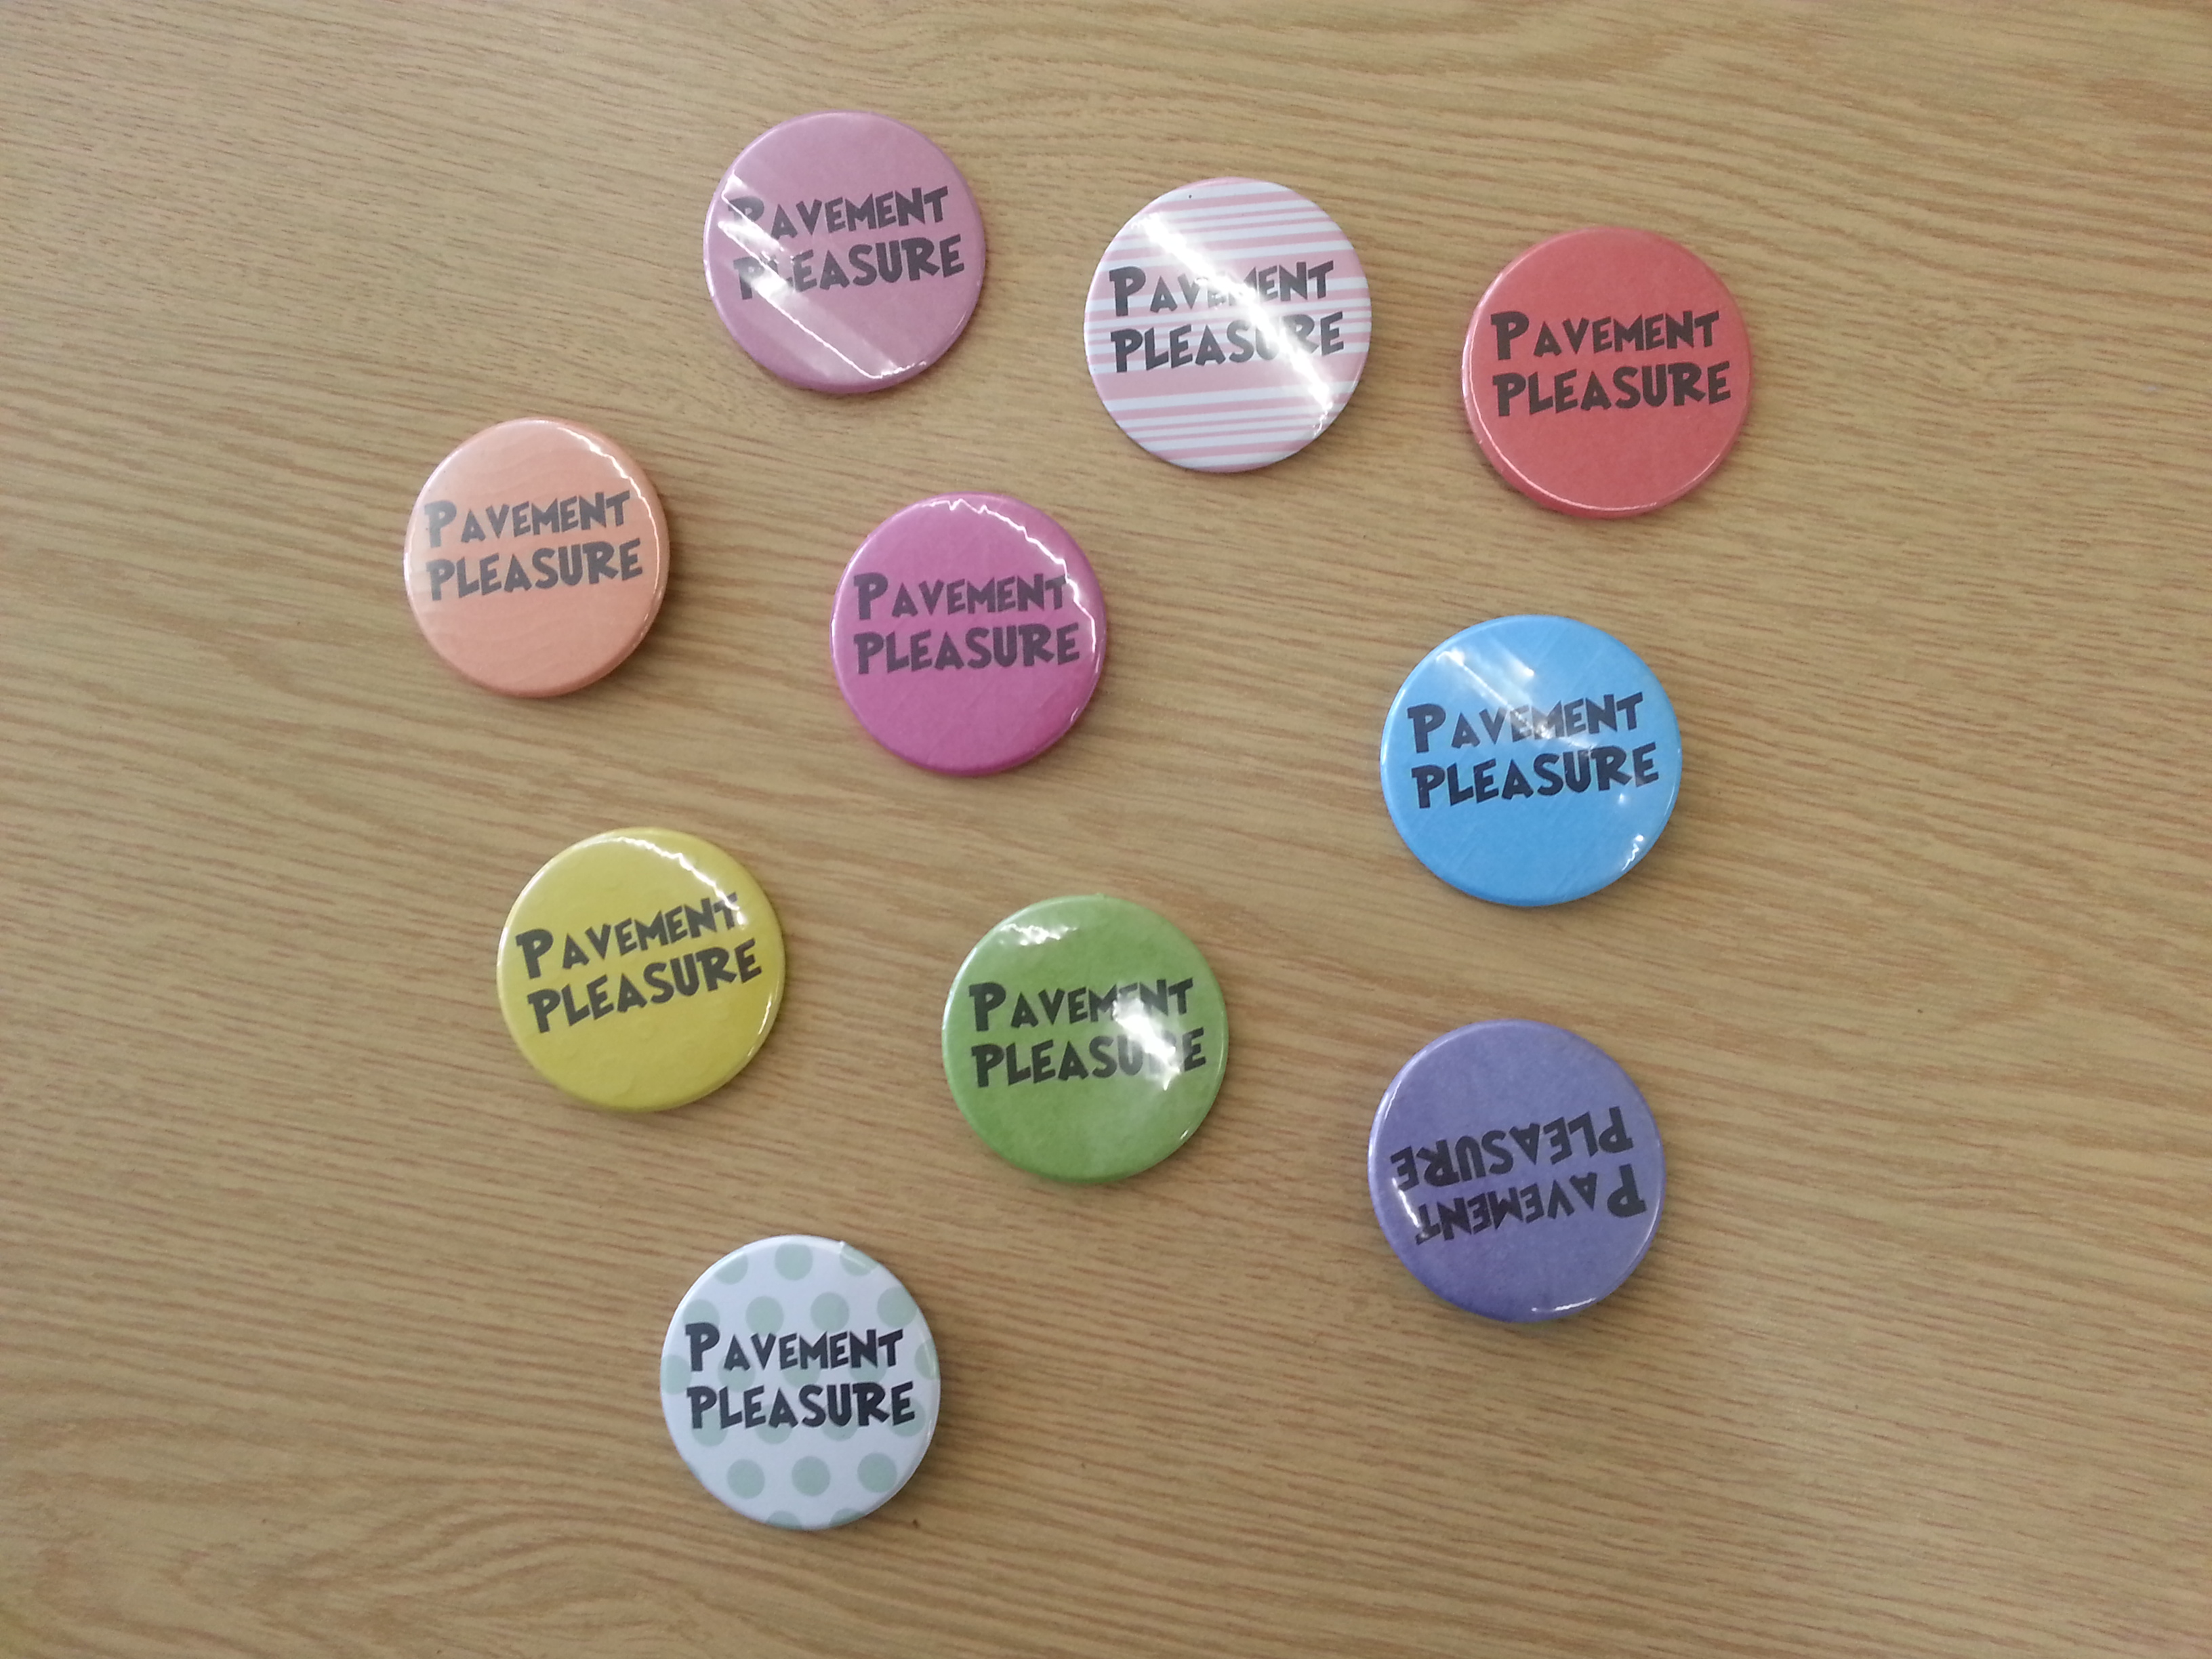 Badges with the words 'Pavement Pleasure' on.